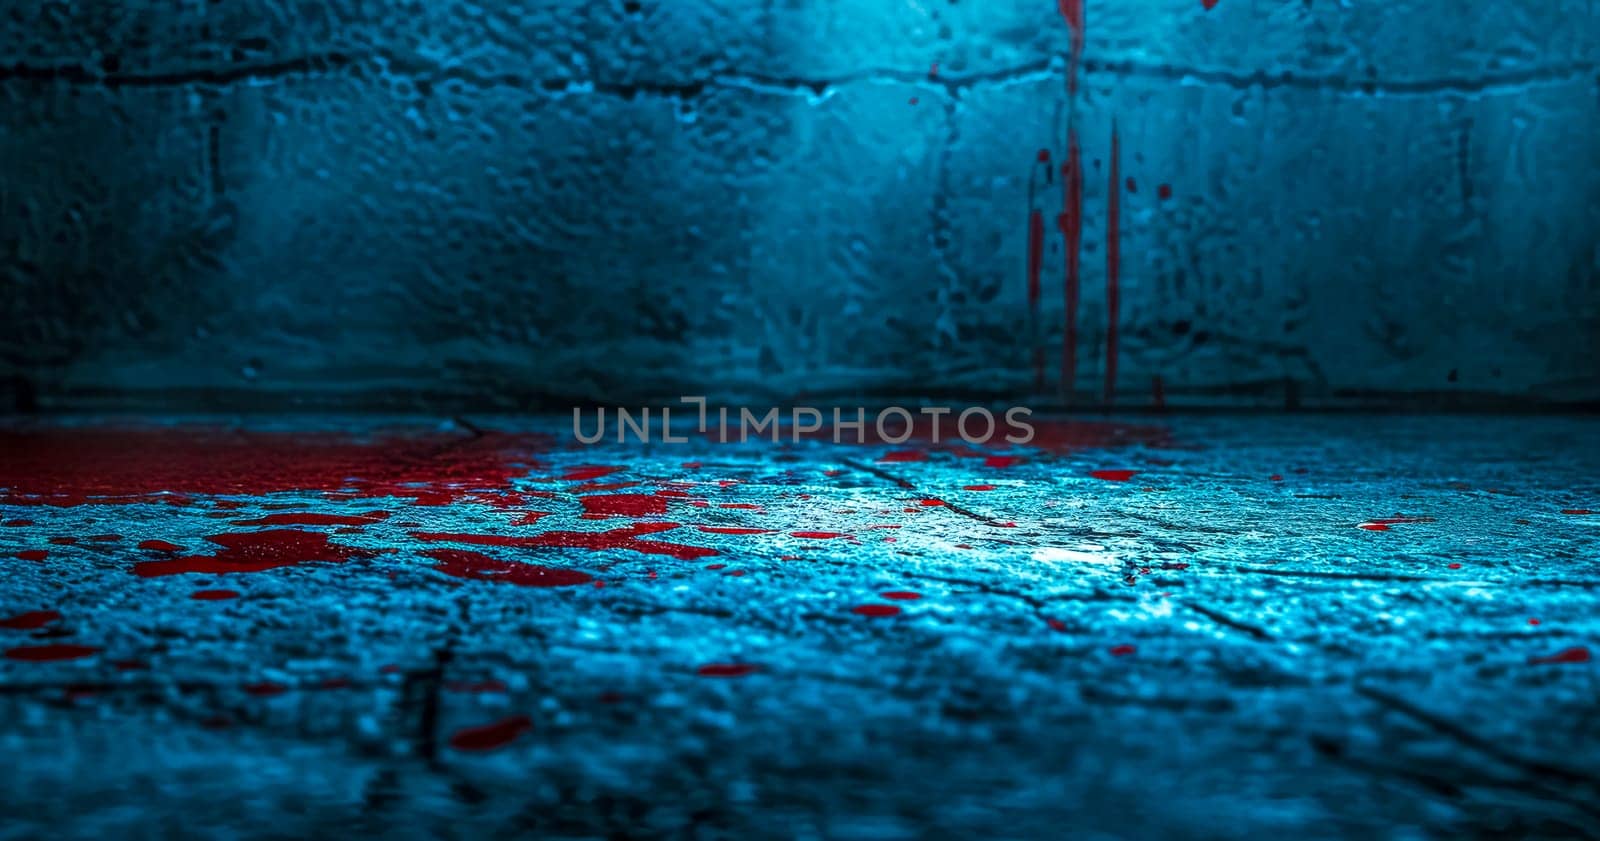 gritty floor splattered with red, suggestive of a crime scene, bathed in a chilling blue light that casts an ominous atmosphere by Edophoto